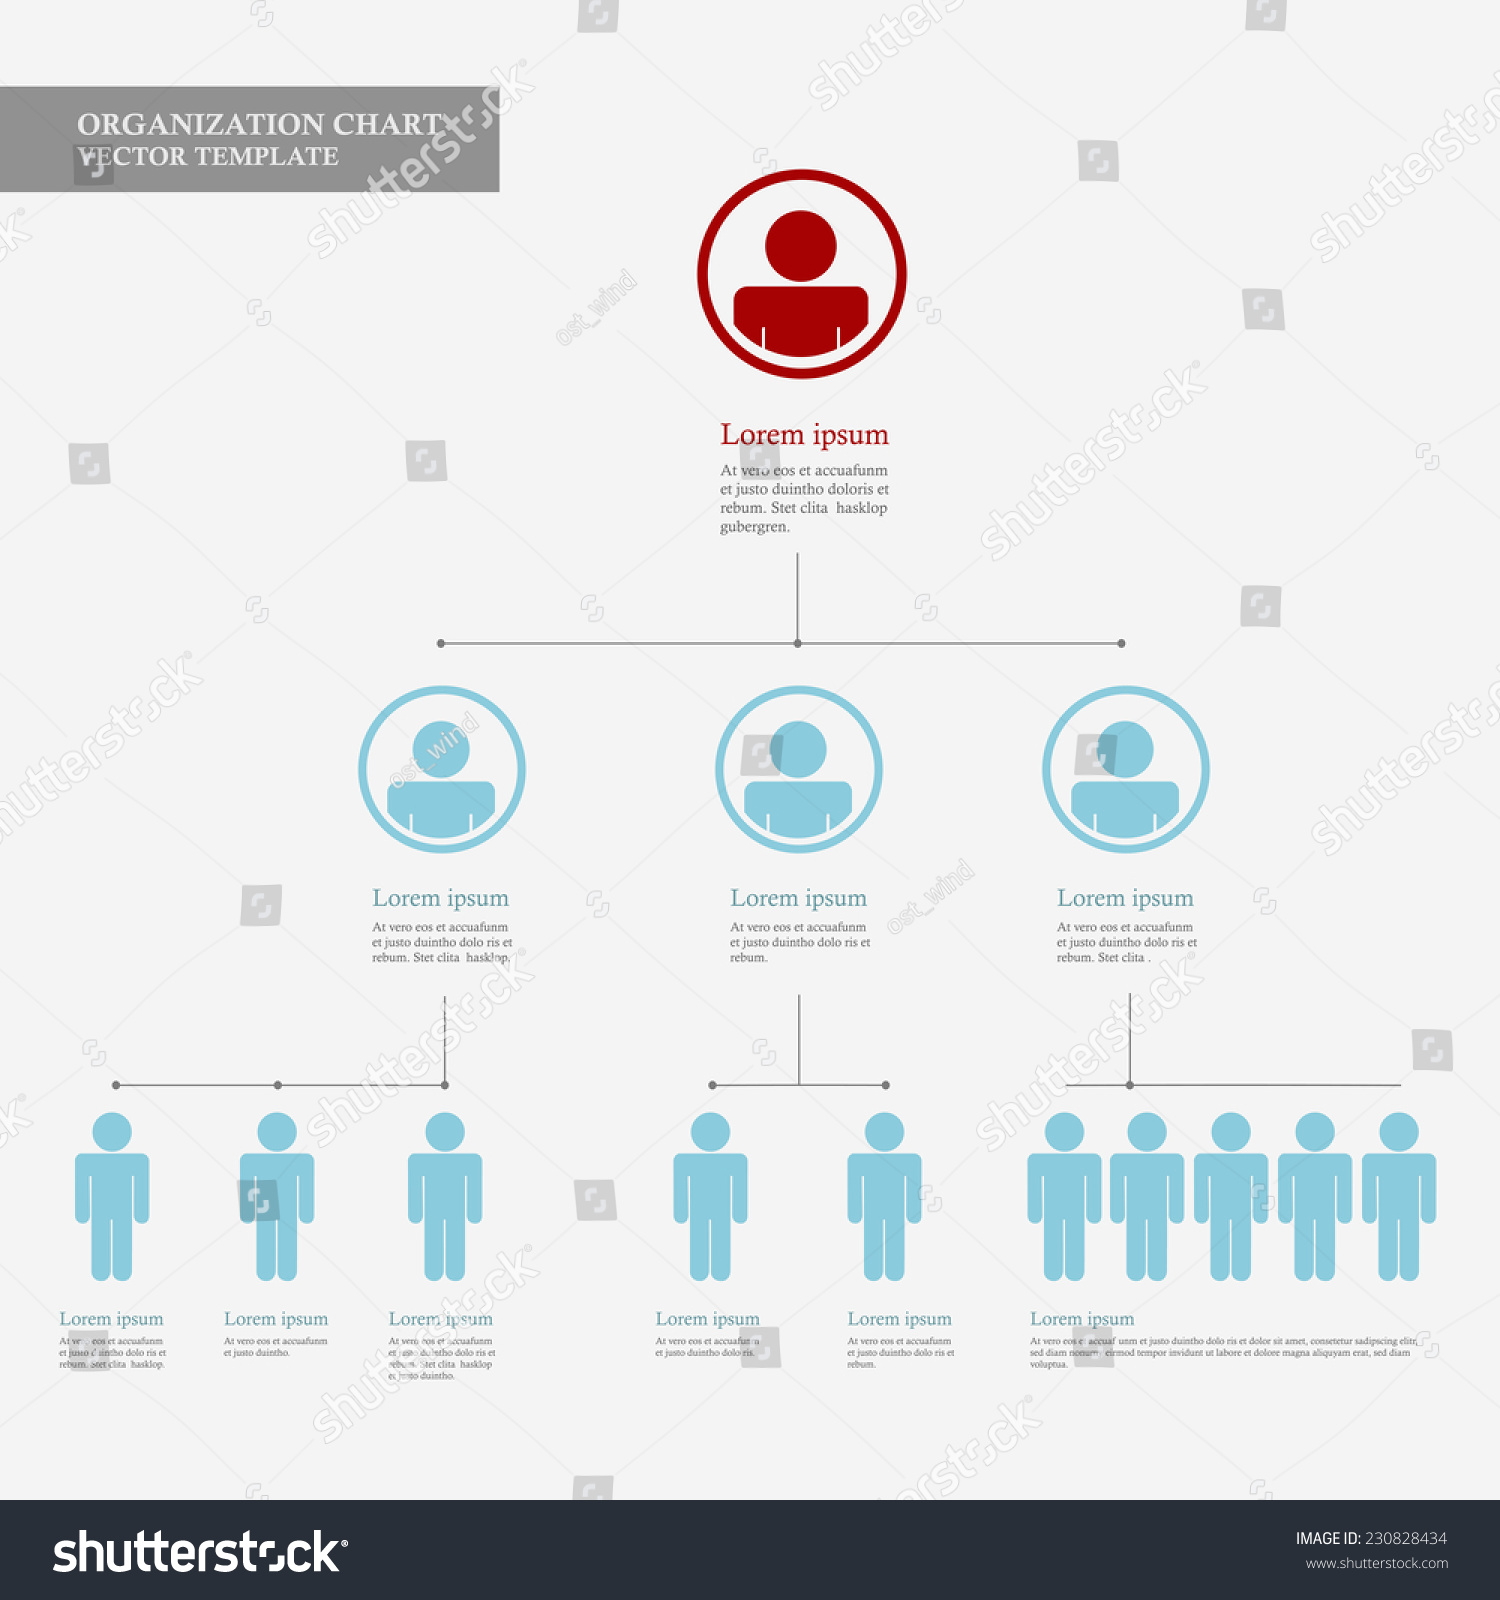 Corporate Organization Chart Template With Business People Icons